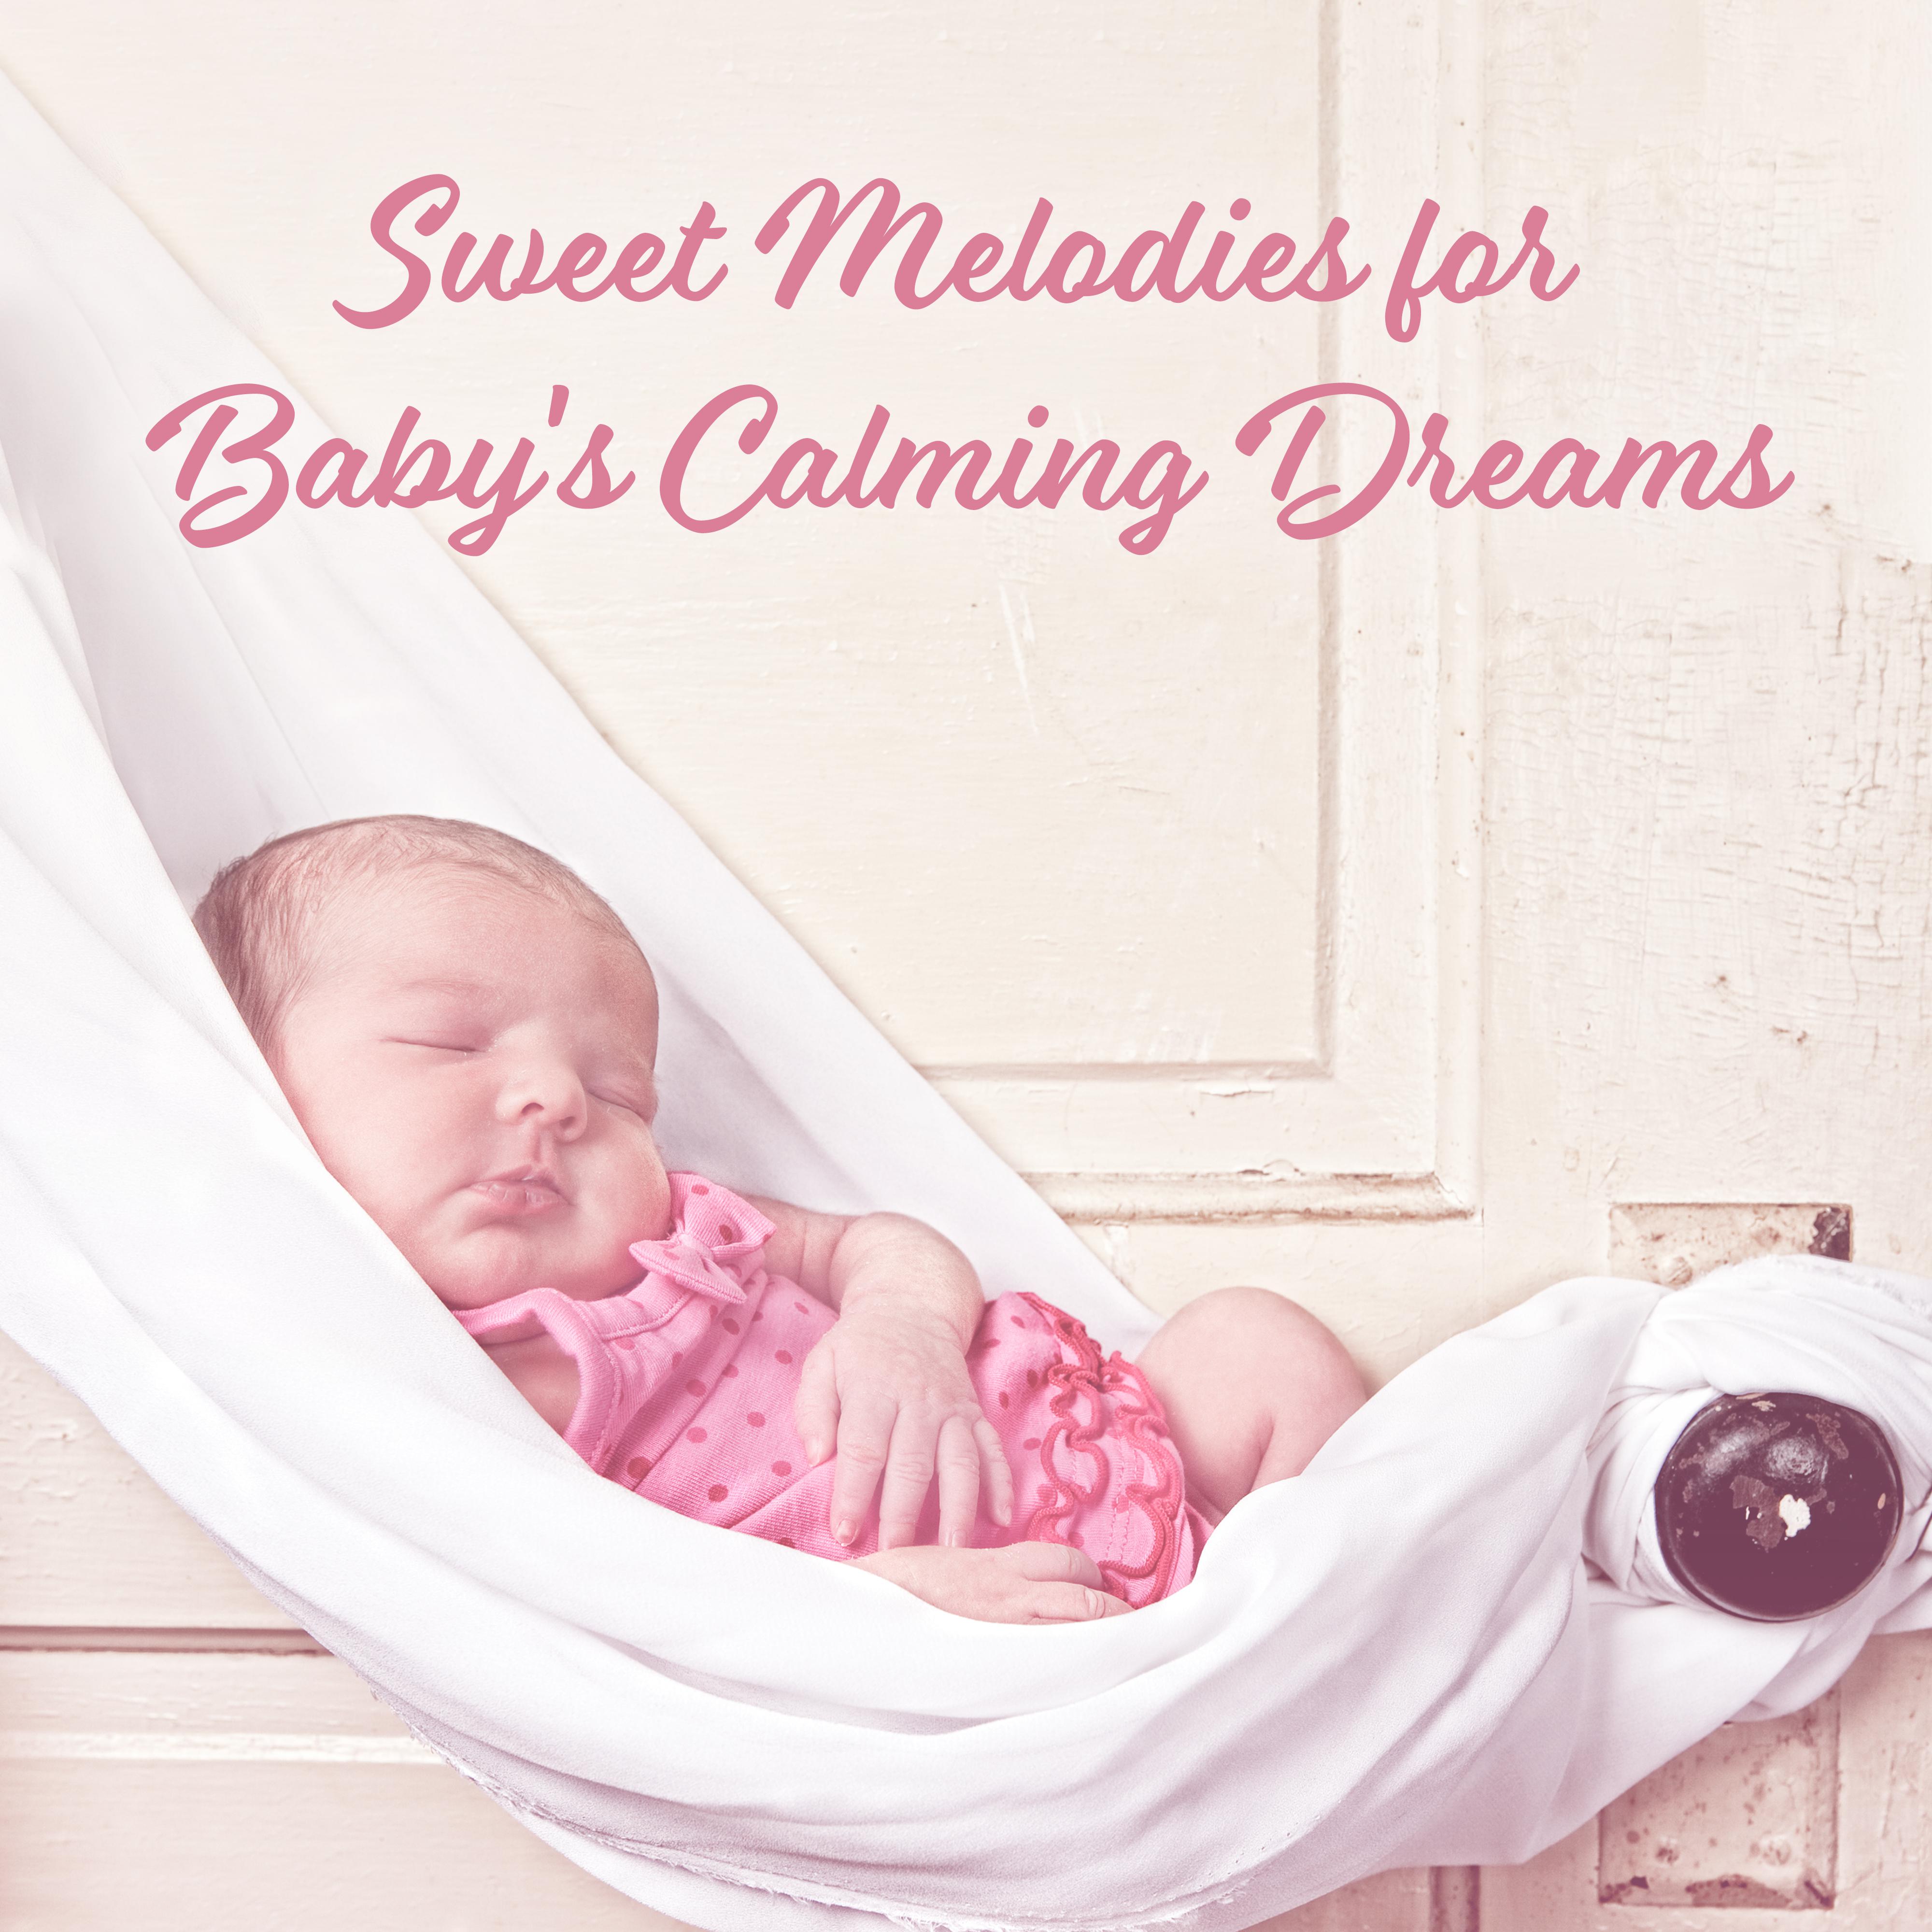 Sweet Melodies for Baby's Calming Dreams: New Age Compilation of 2019 Music for Good Sleep, Cure Insomnia, Calming Down